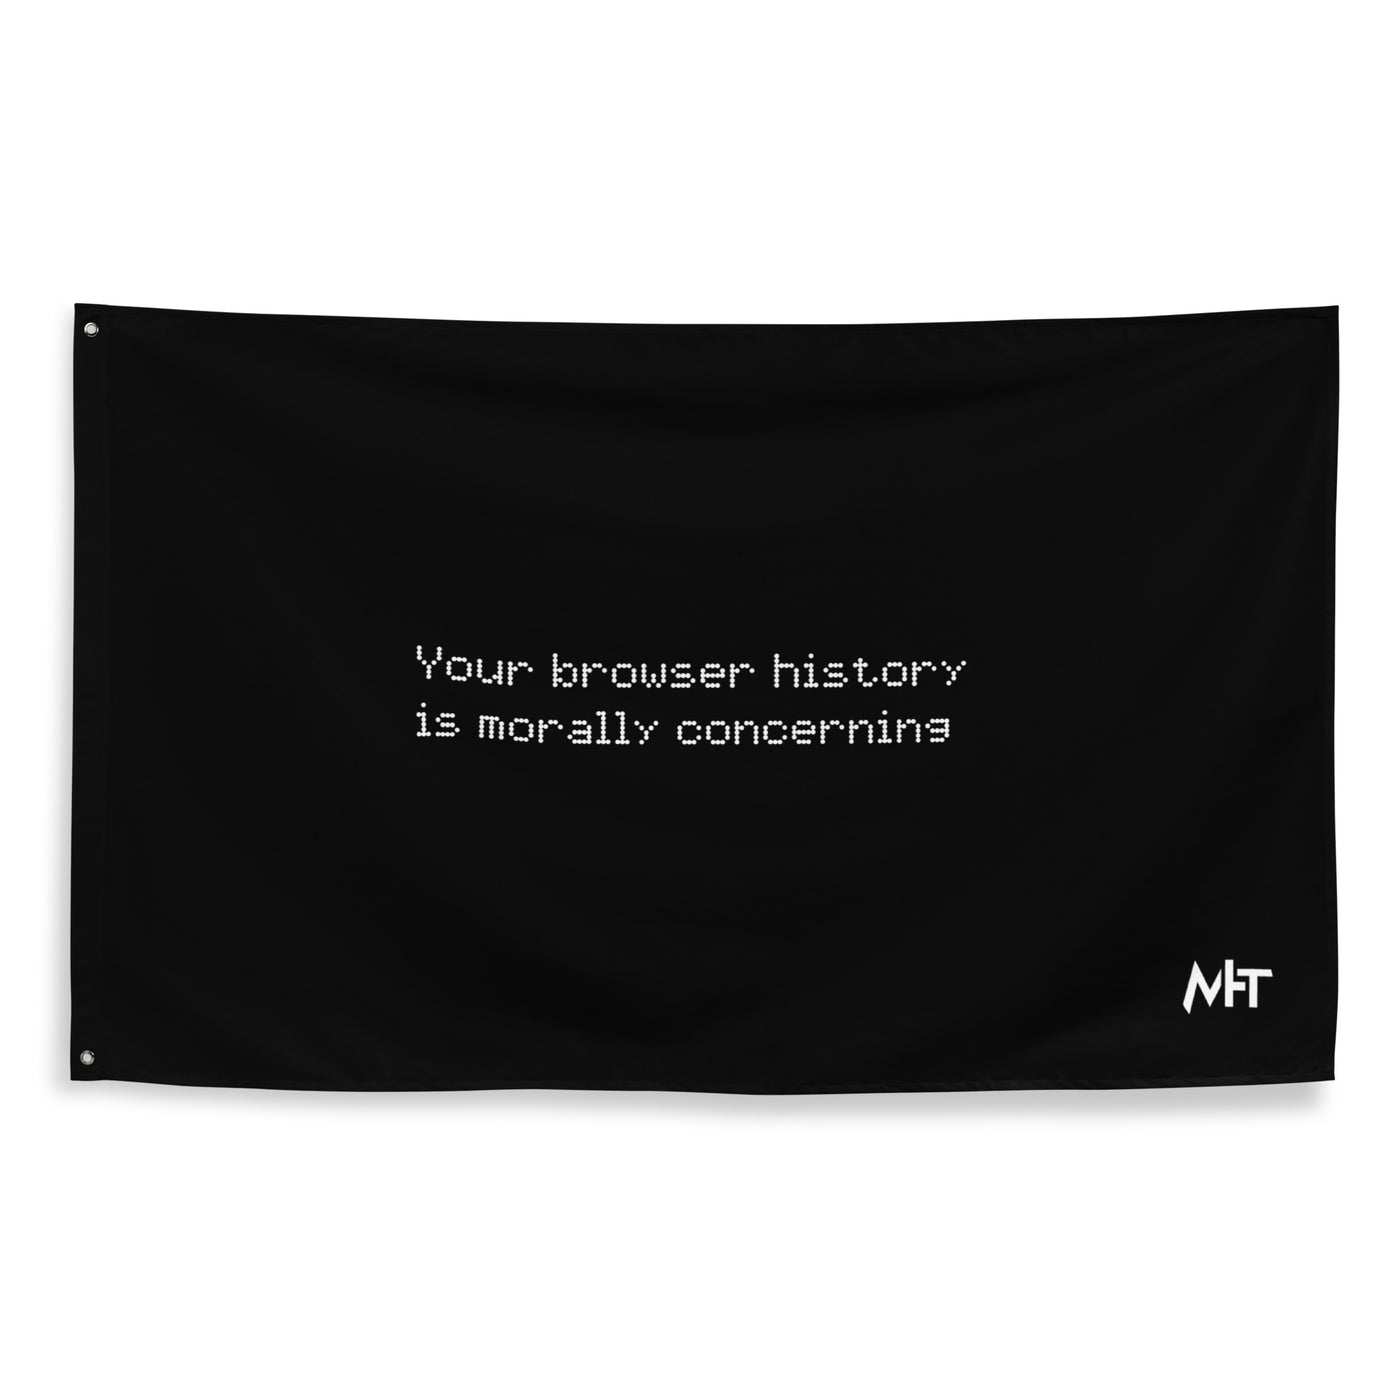 Your Browser History is Morally Concerning  V2 Flag